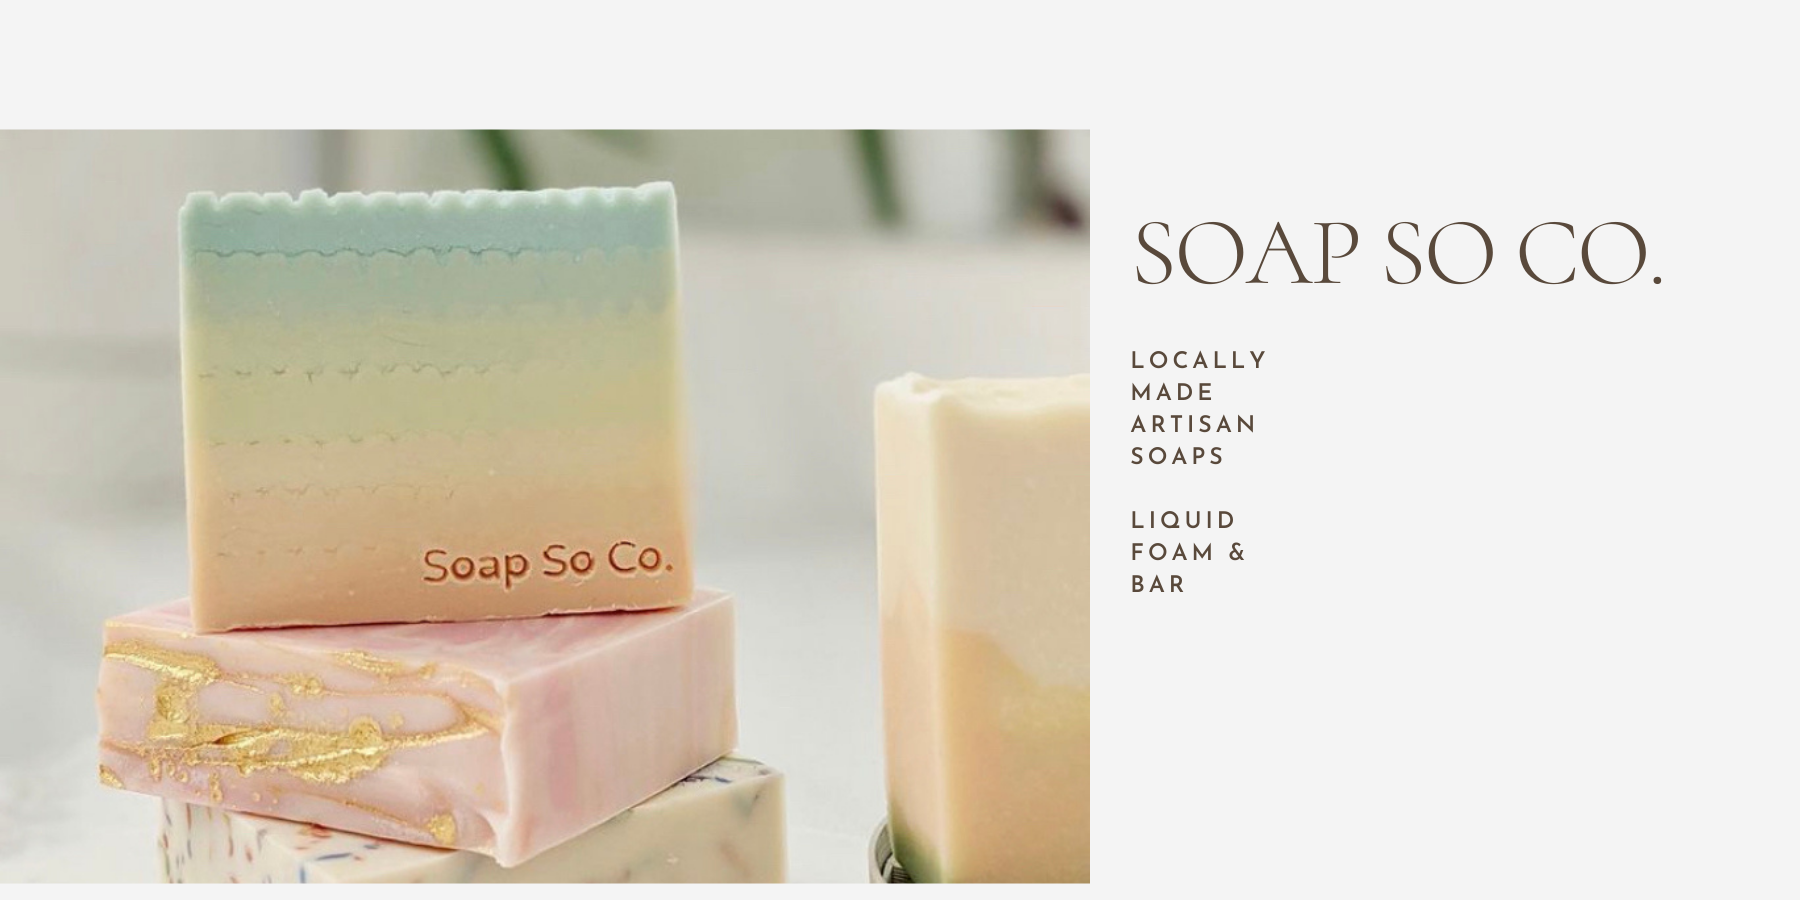 Soap So Co. is making a new kind of soap. Artistically designed, handcrafted soaps that are sustainable, 100% vegan, and cruelty-free.